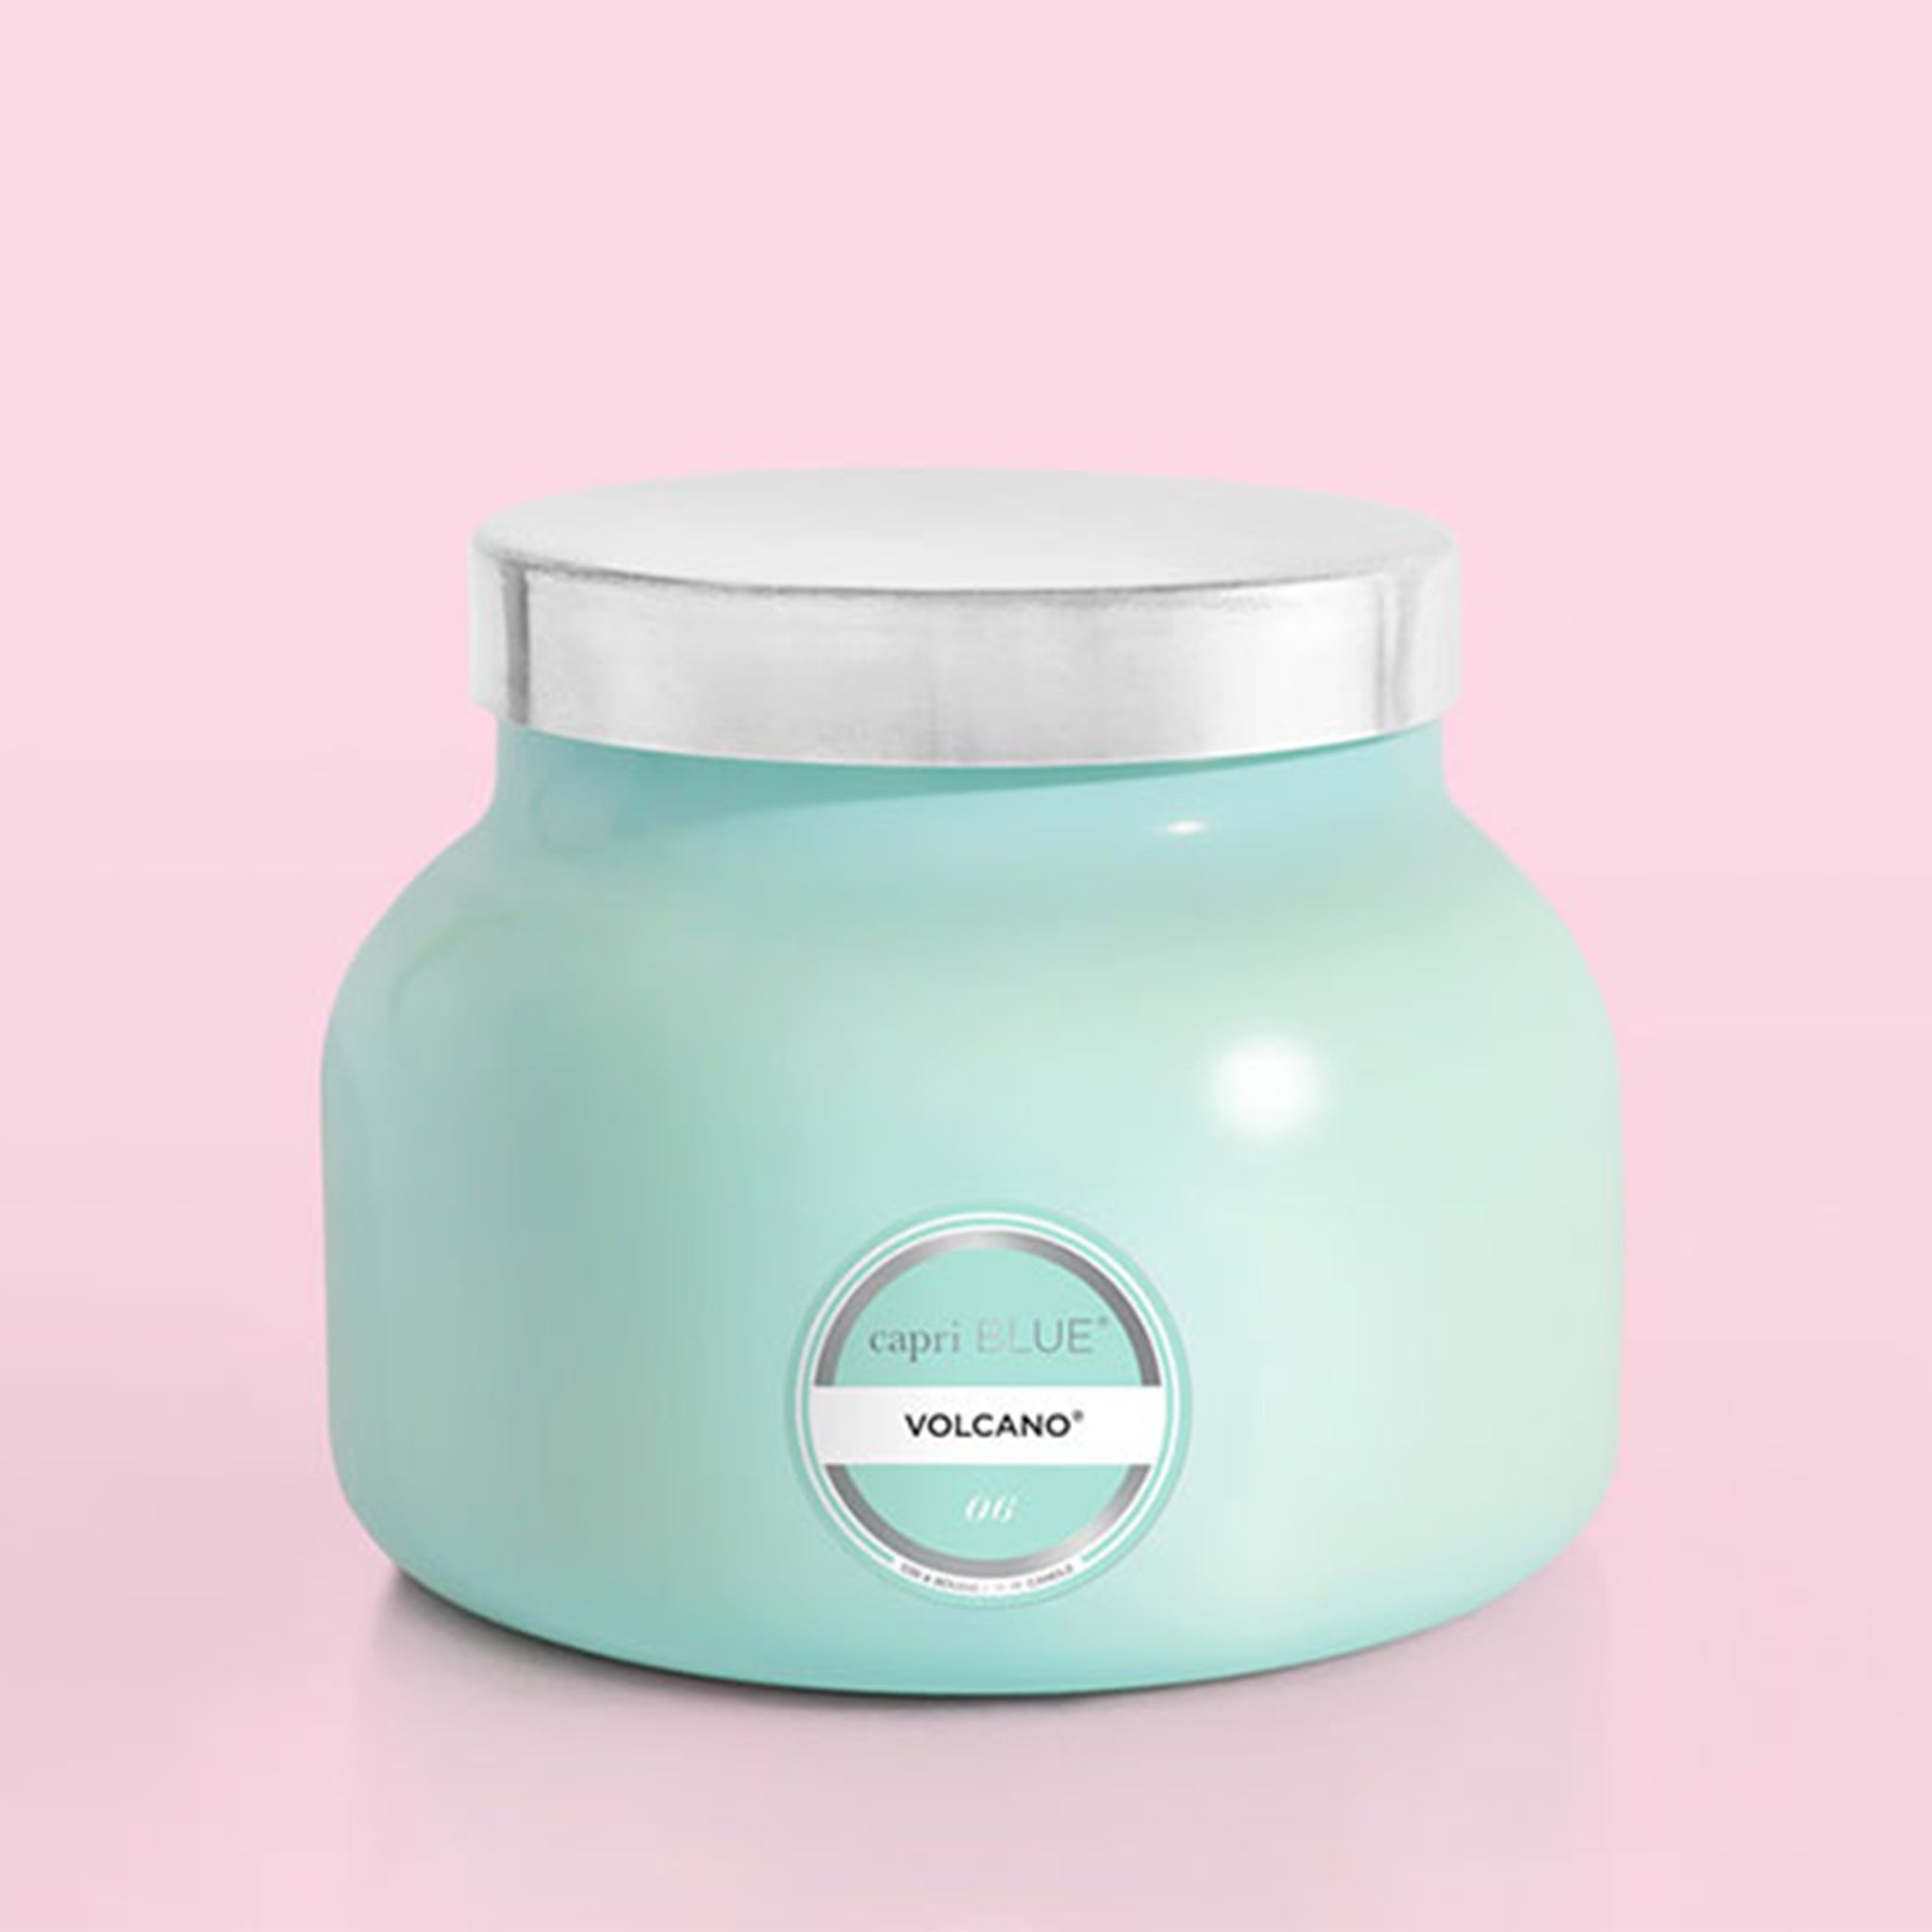 On a pink background is an aqua blue glass jar candle with a silver lid on top.